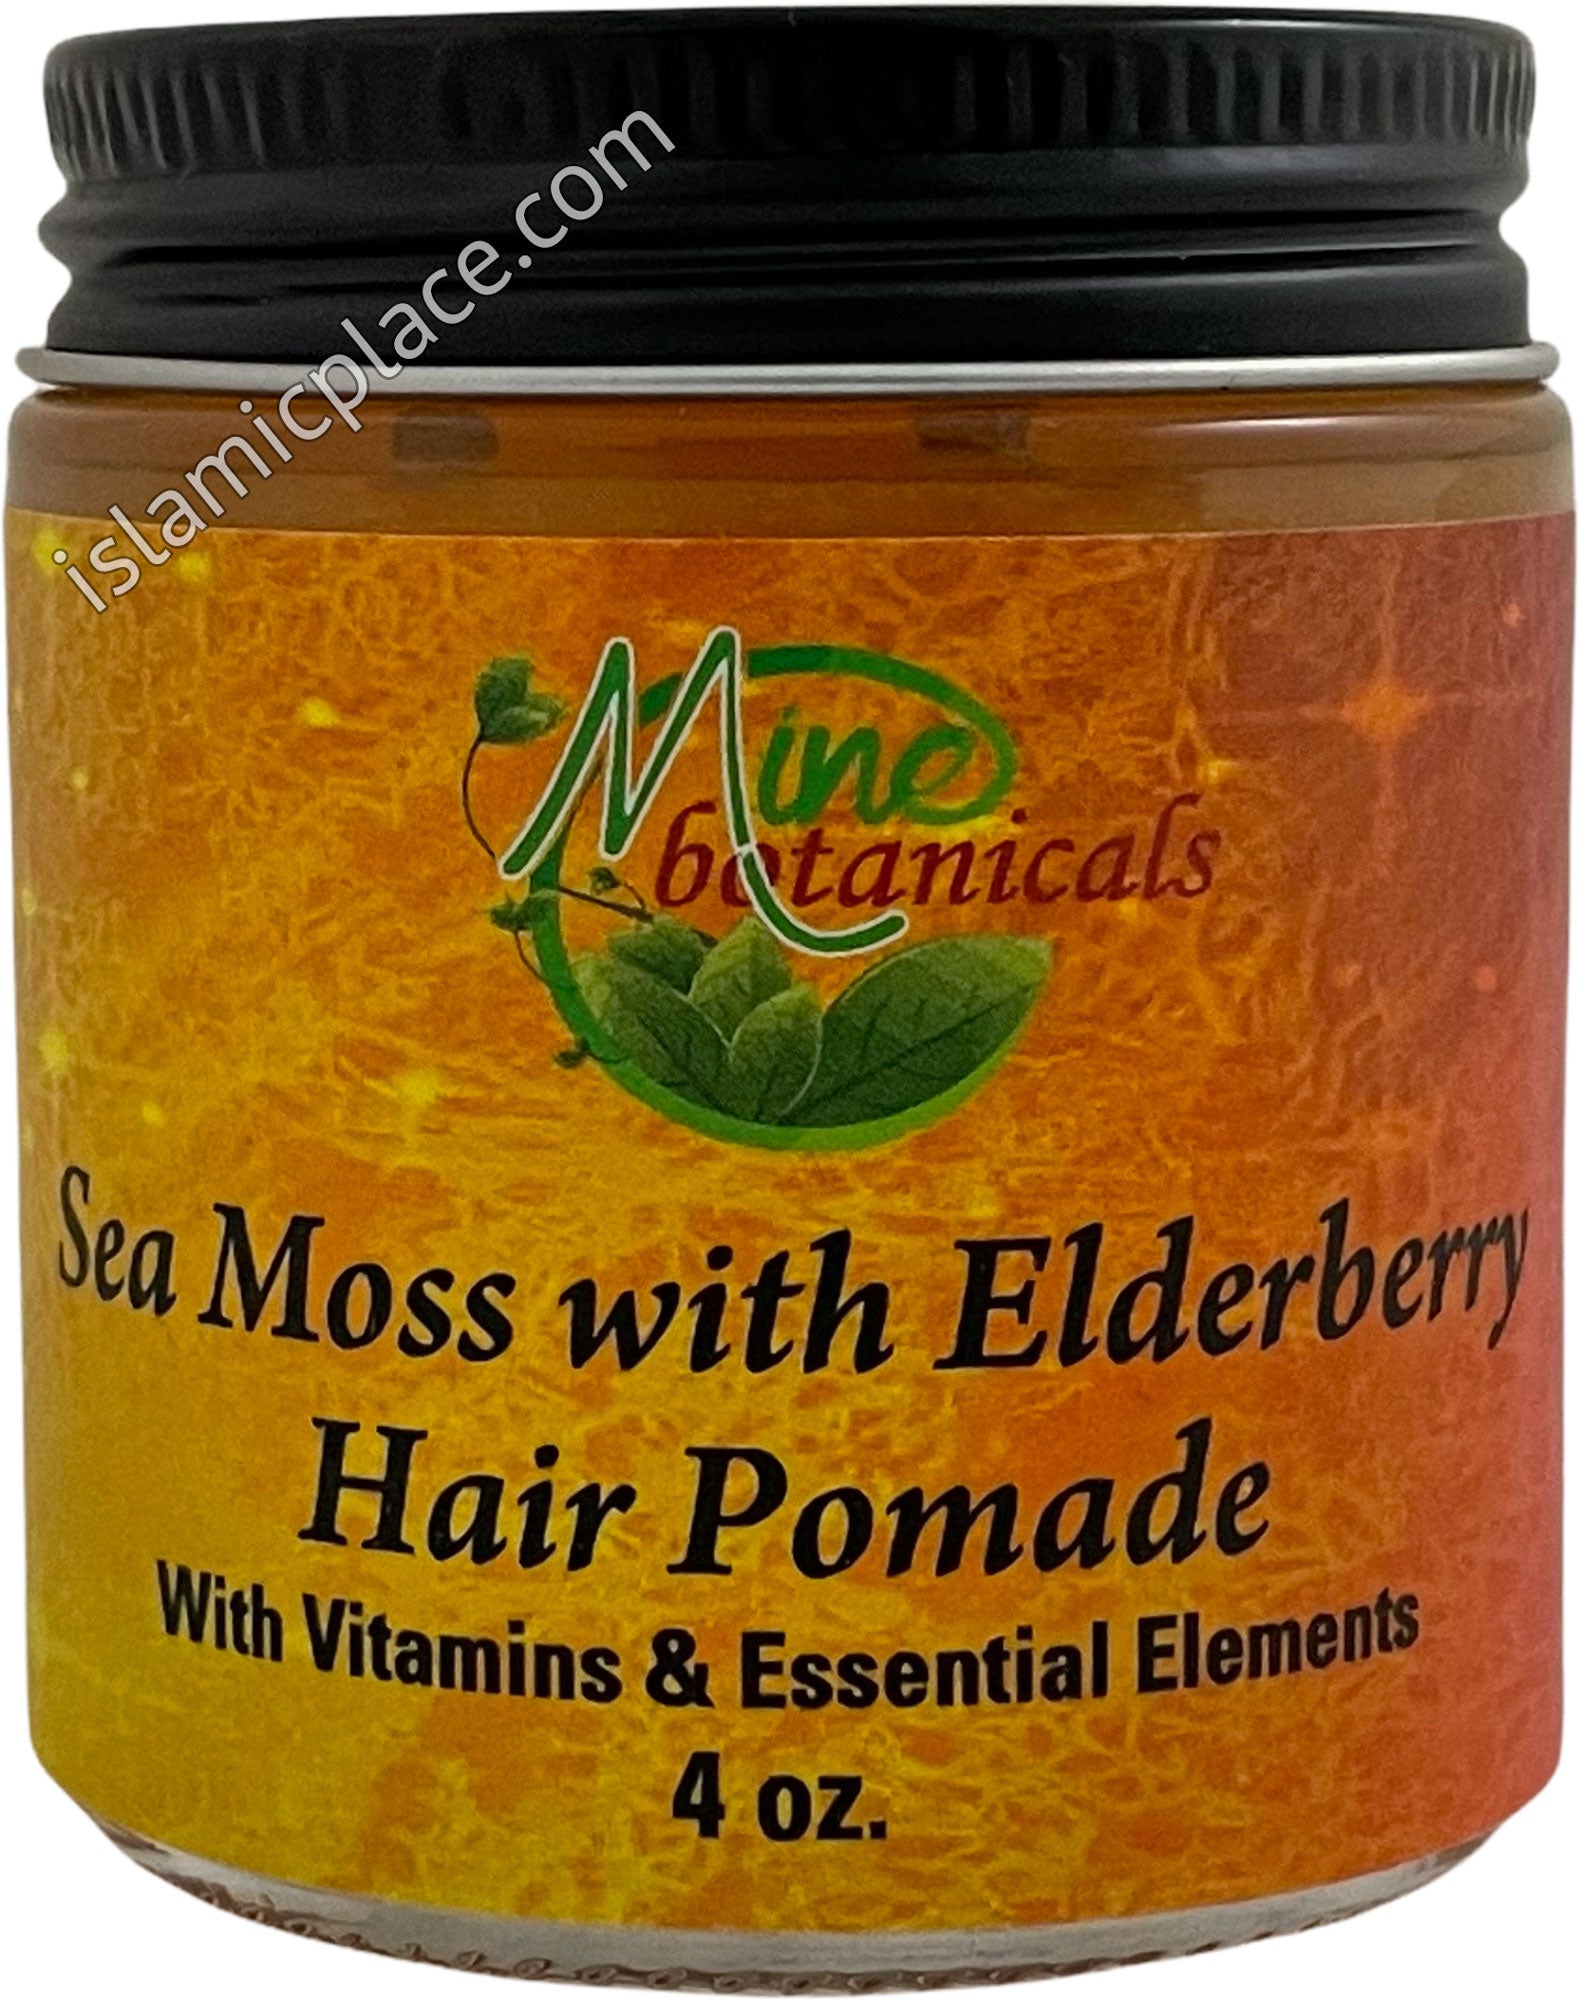 Sea Moss with Elderberry Hair Pomade with Vitamins & Essential Elements